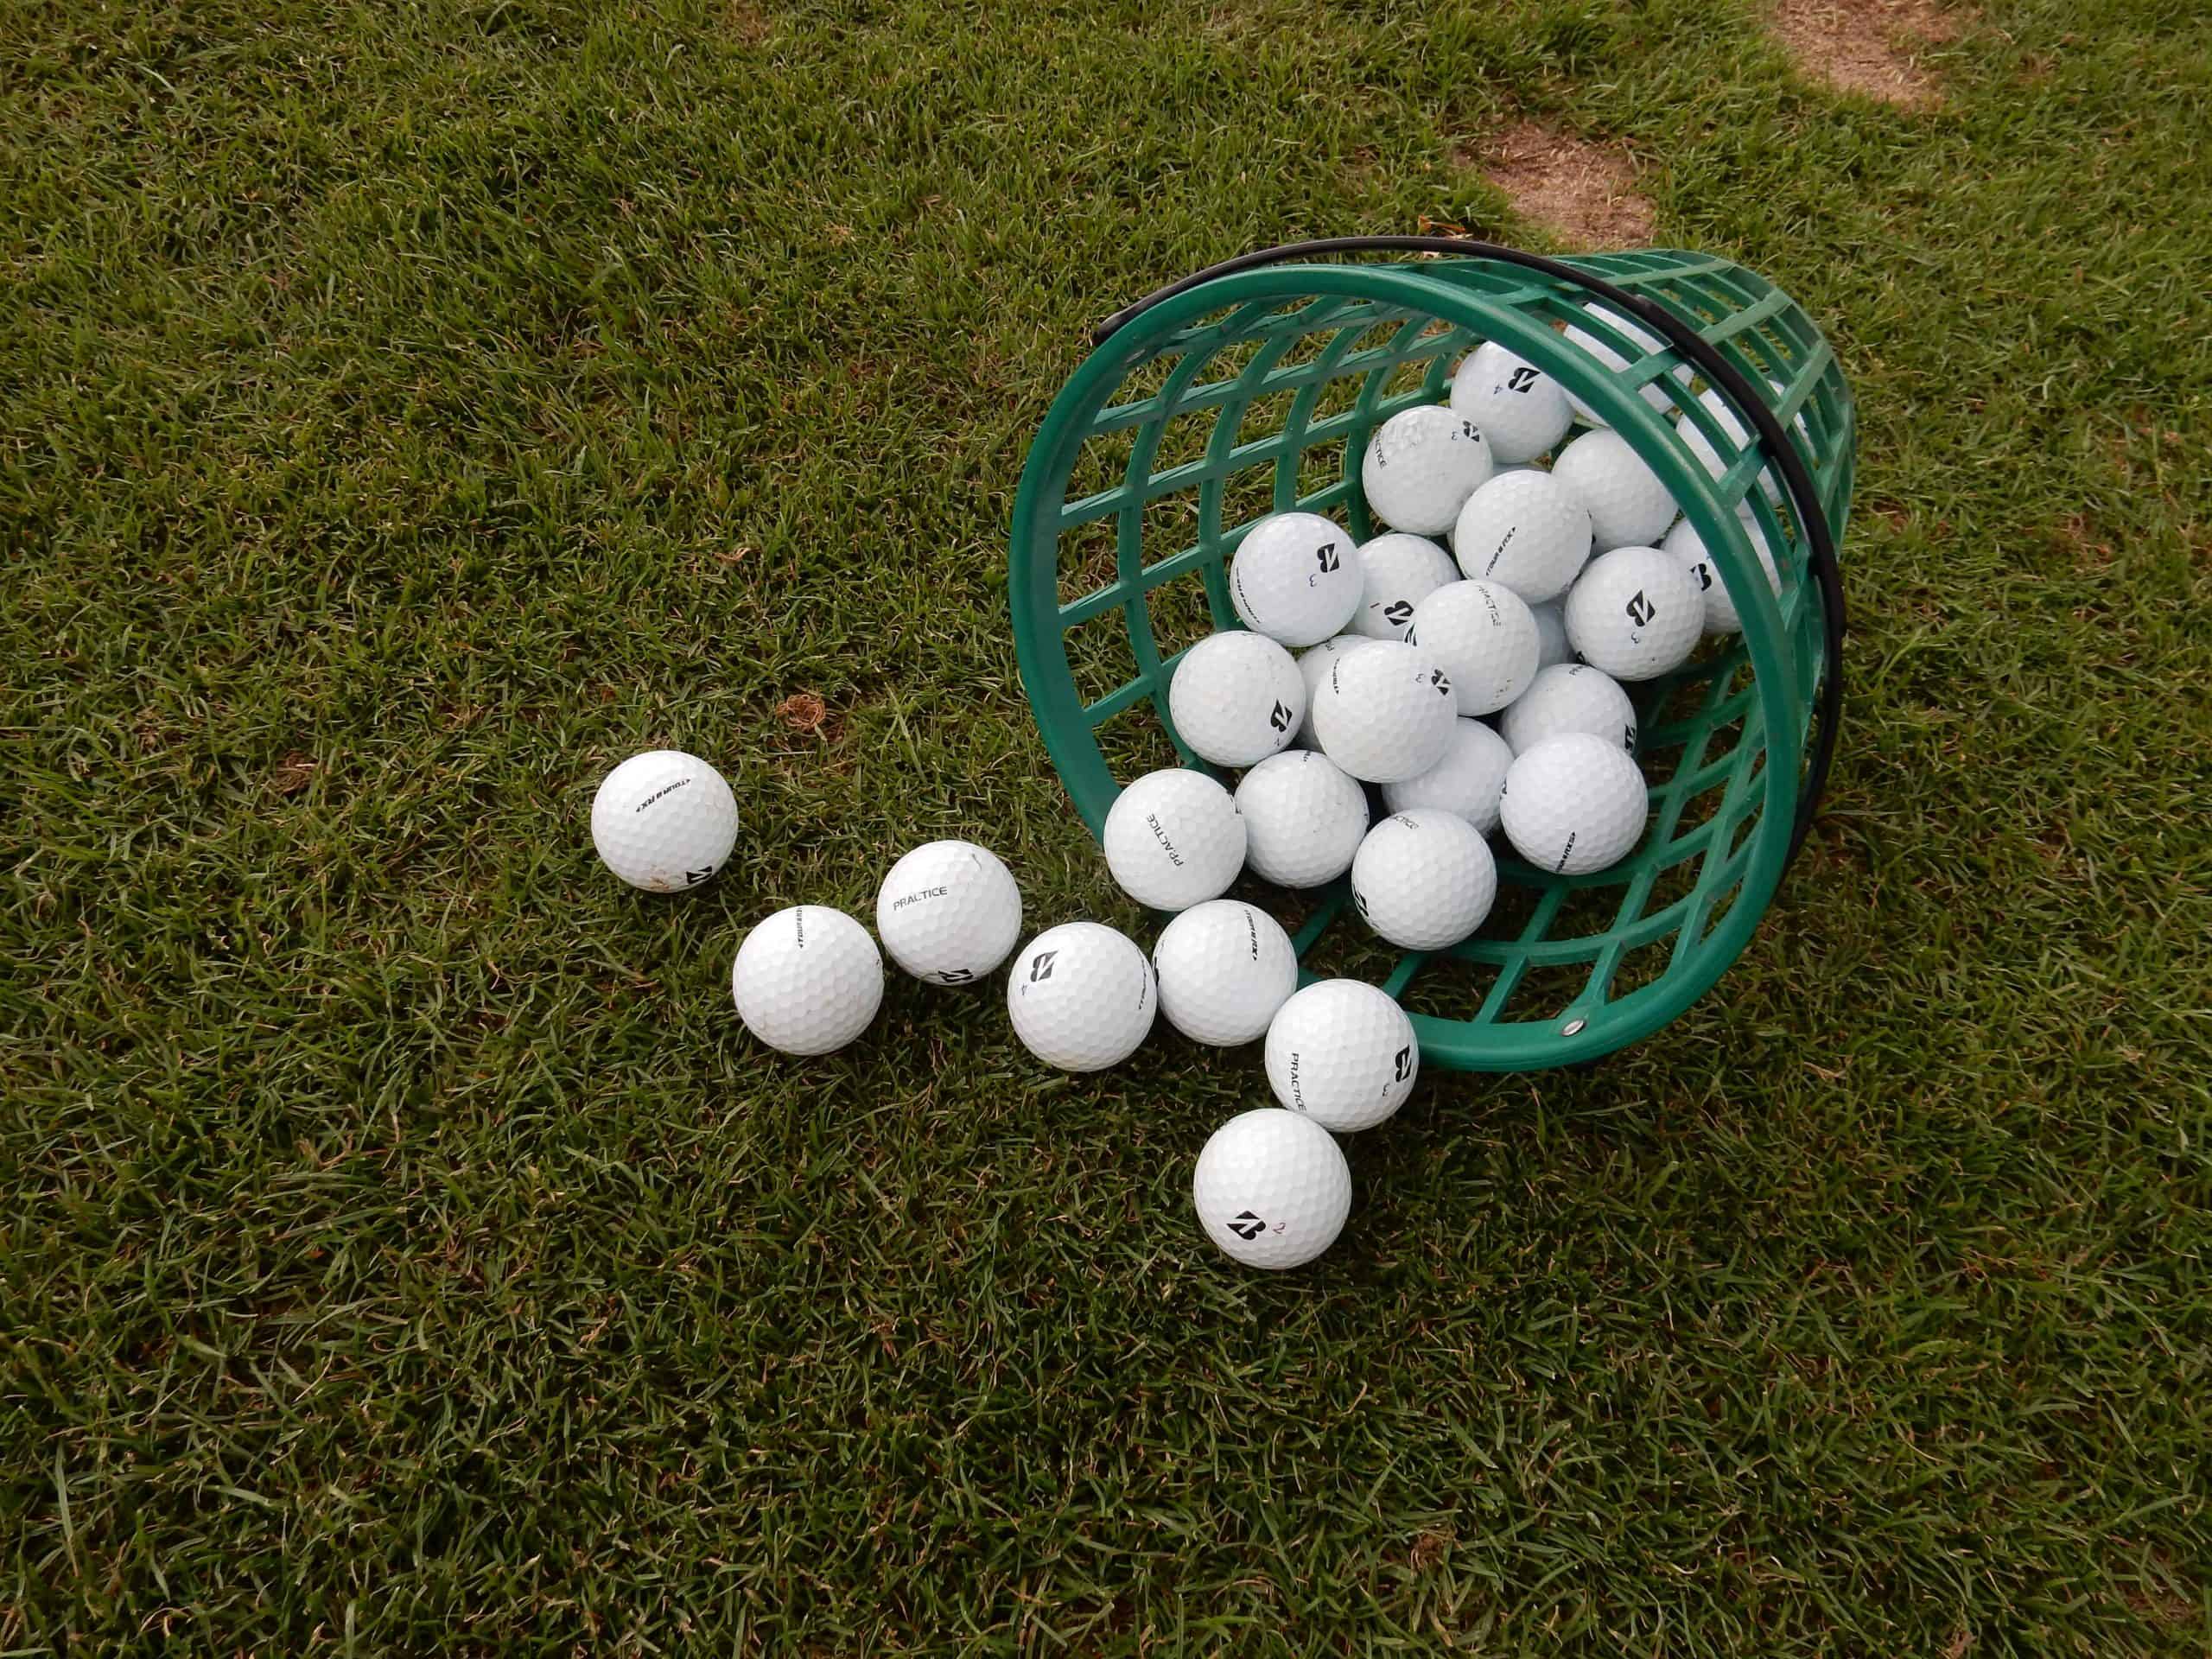 Best Golf Balls For Beginners - Read Before Purchasing!